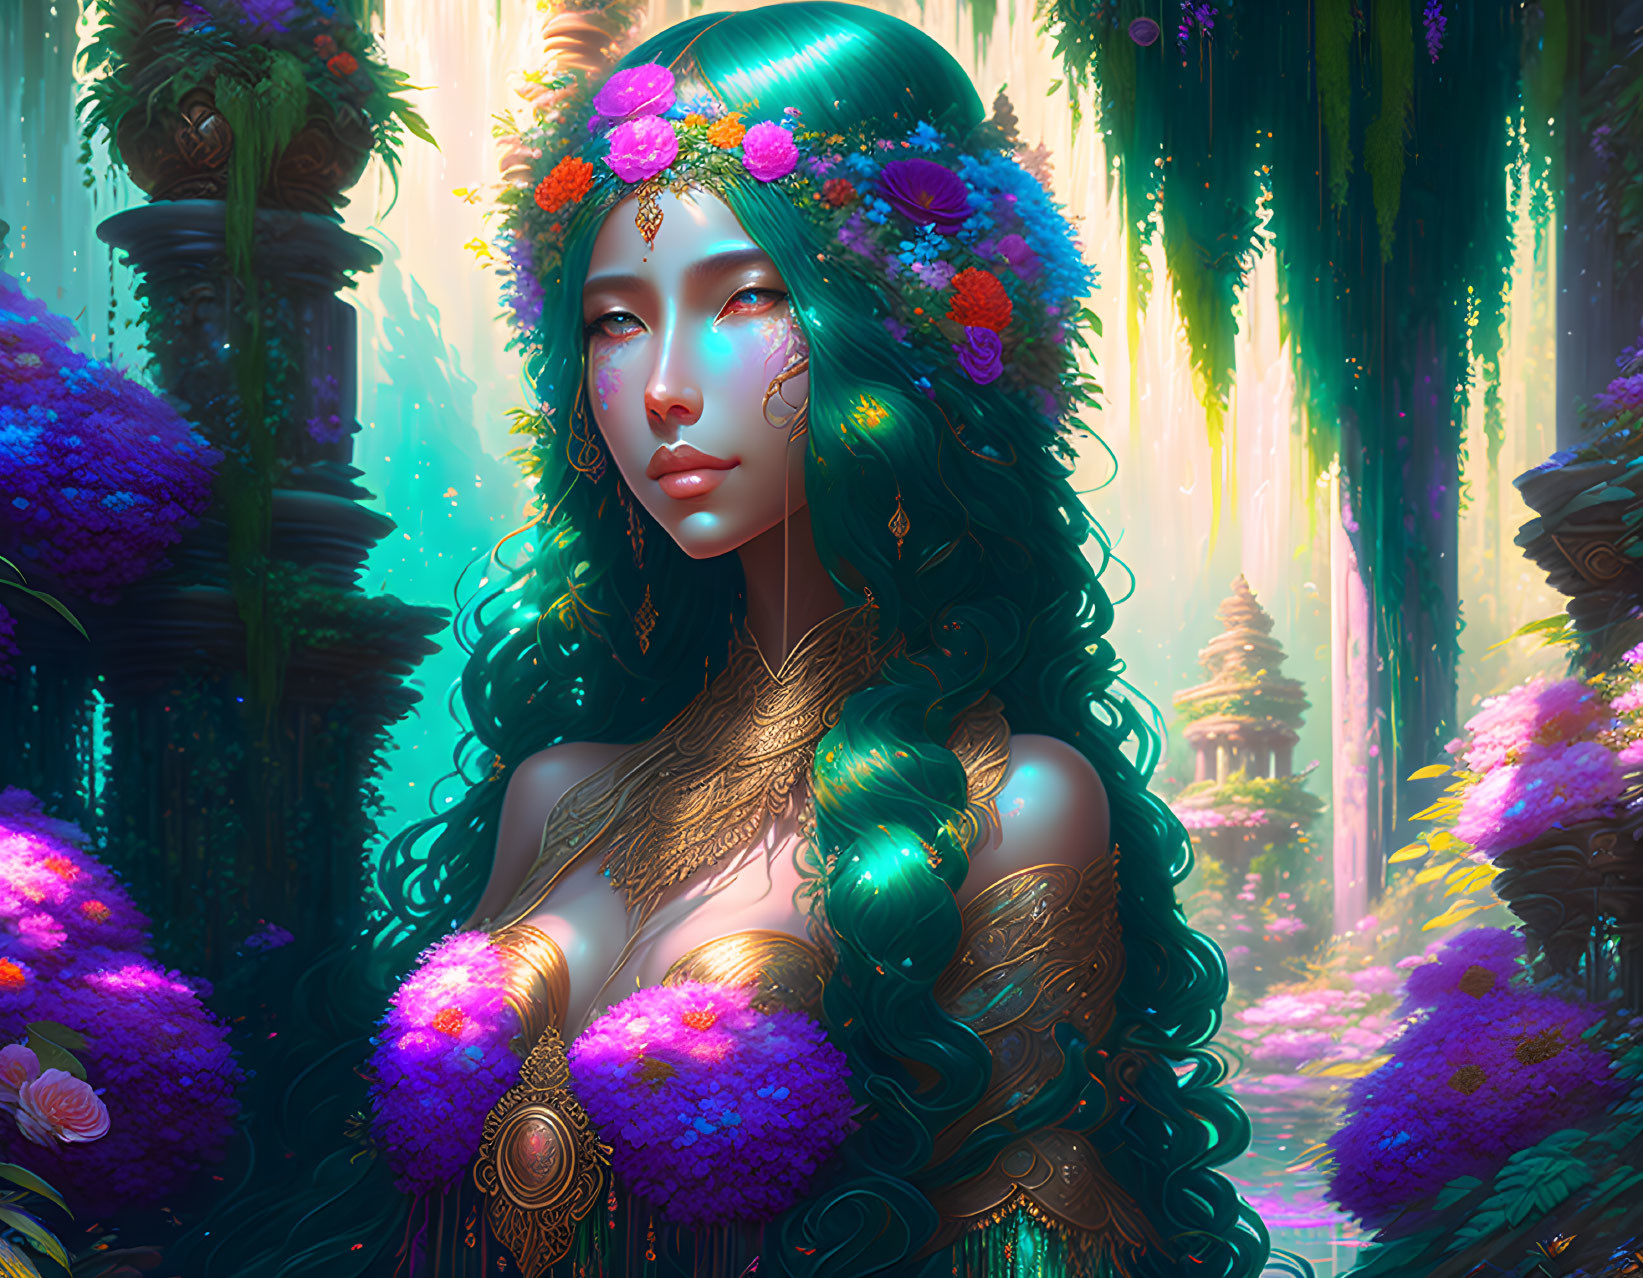 Enchanted forest scene: mystical woman with green hair and vibrant flower adornments.